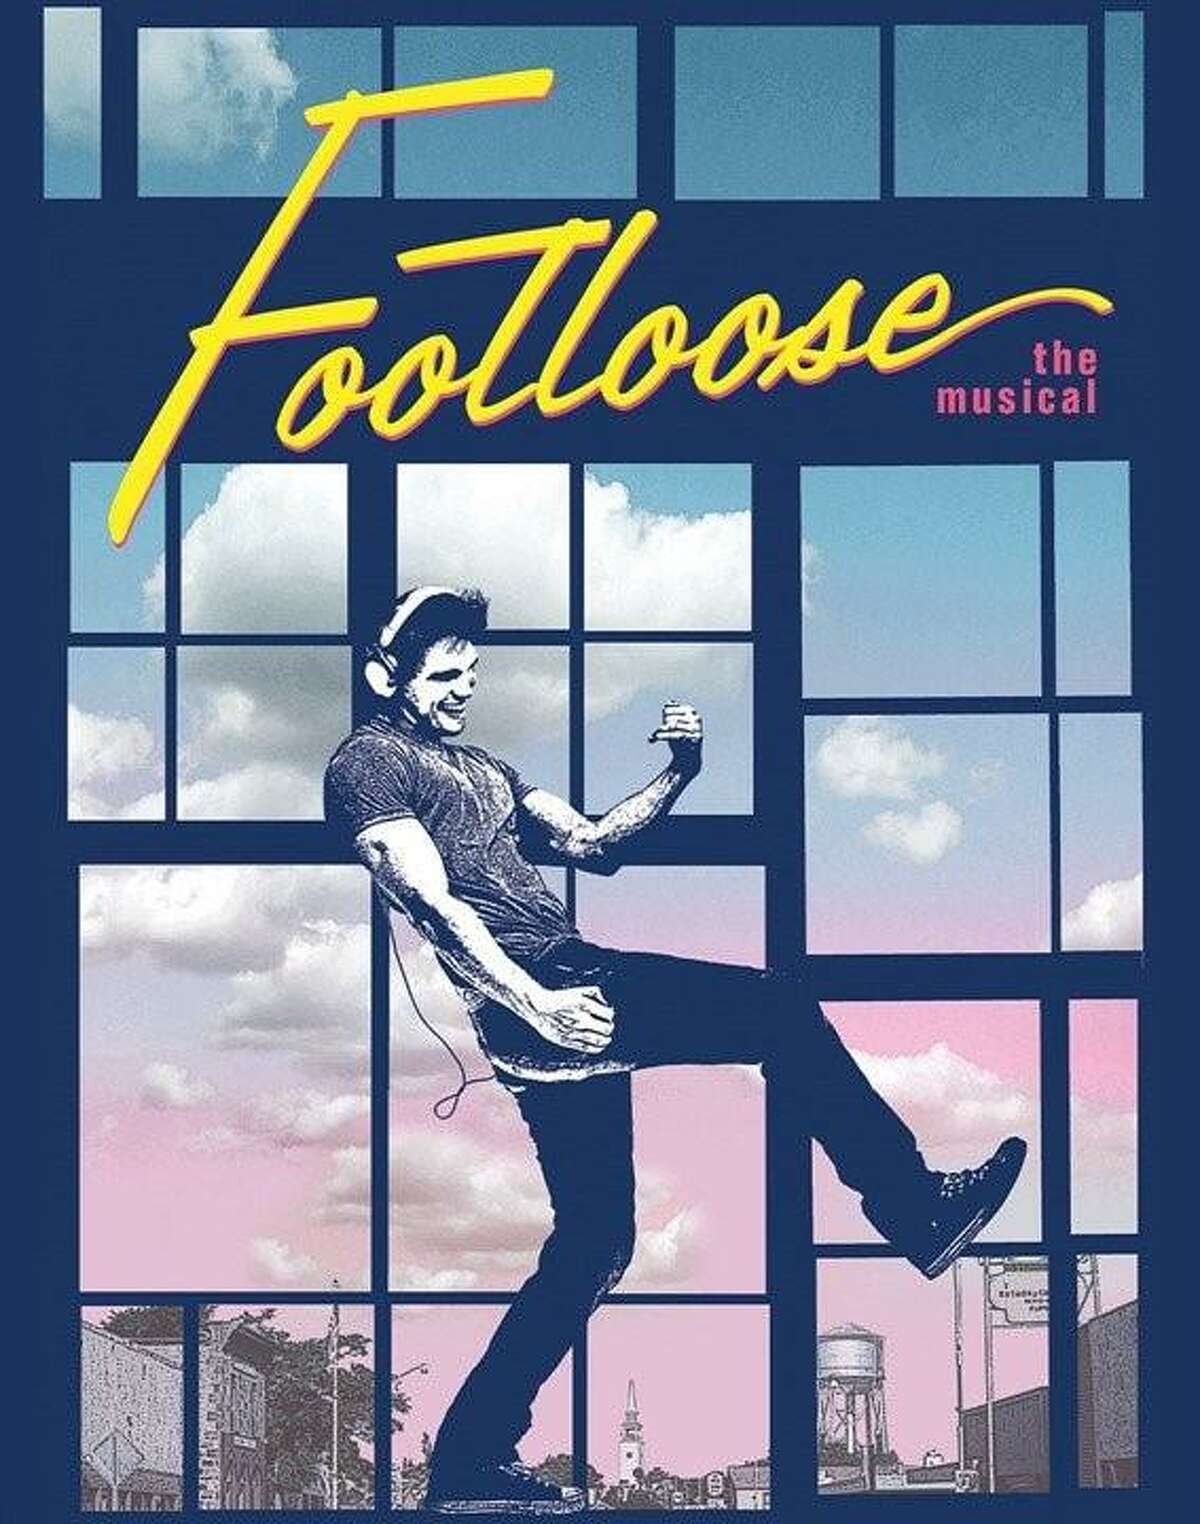 The Warner Center for Arts Education is presenting ‘Footloose’ in June.